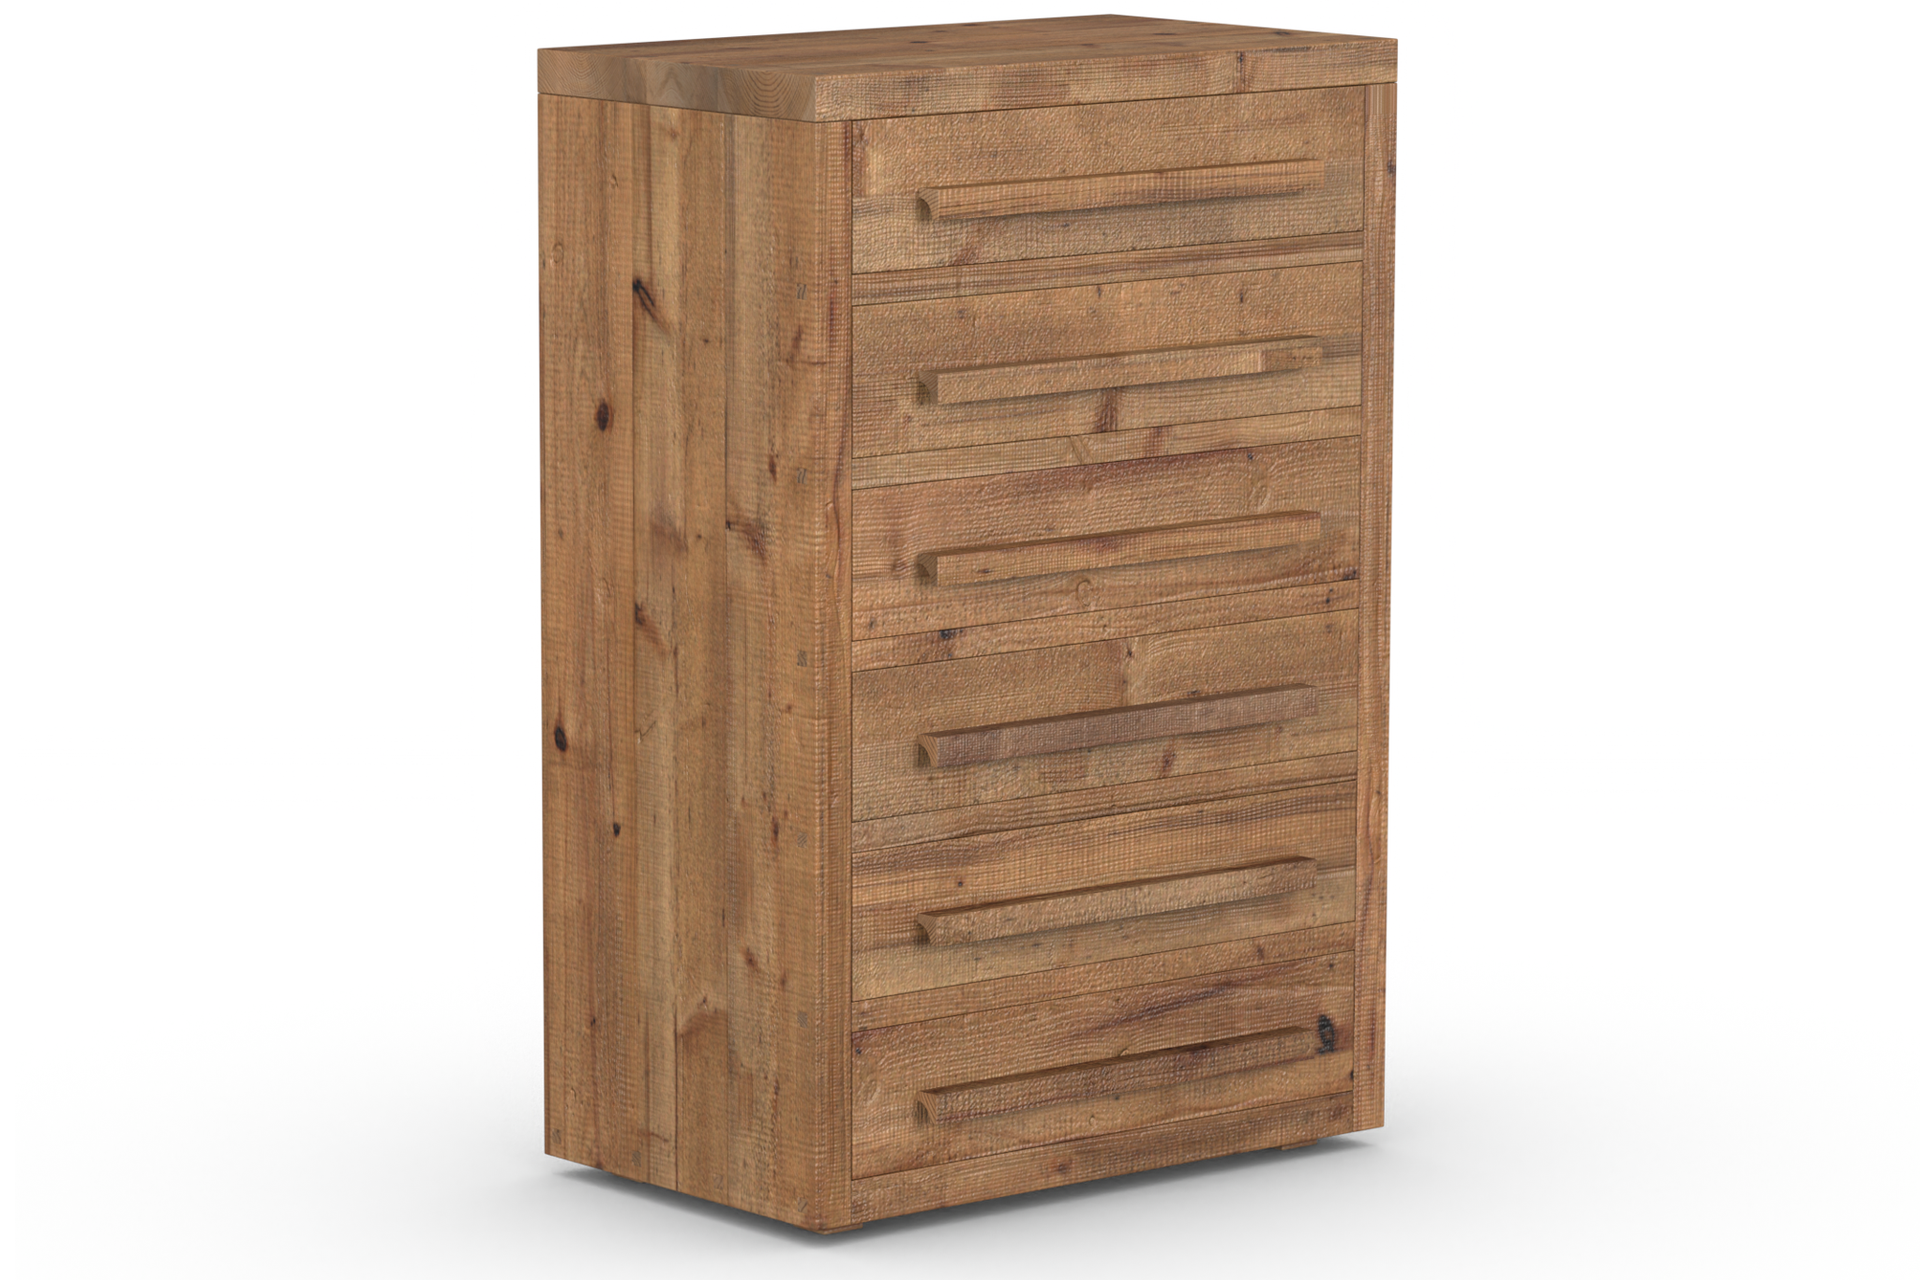 Reclaimed Rustic Wood Branson Chest Of Drawers – Eat Sleep Live